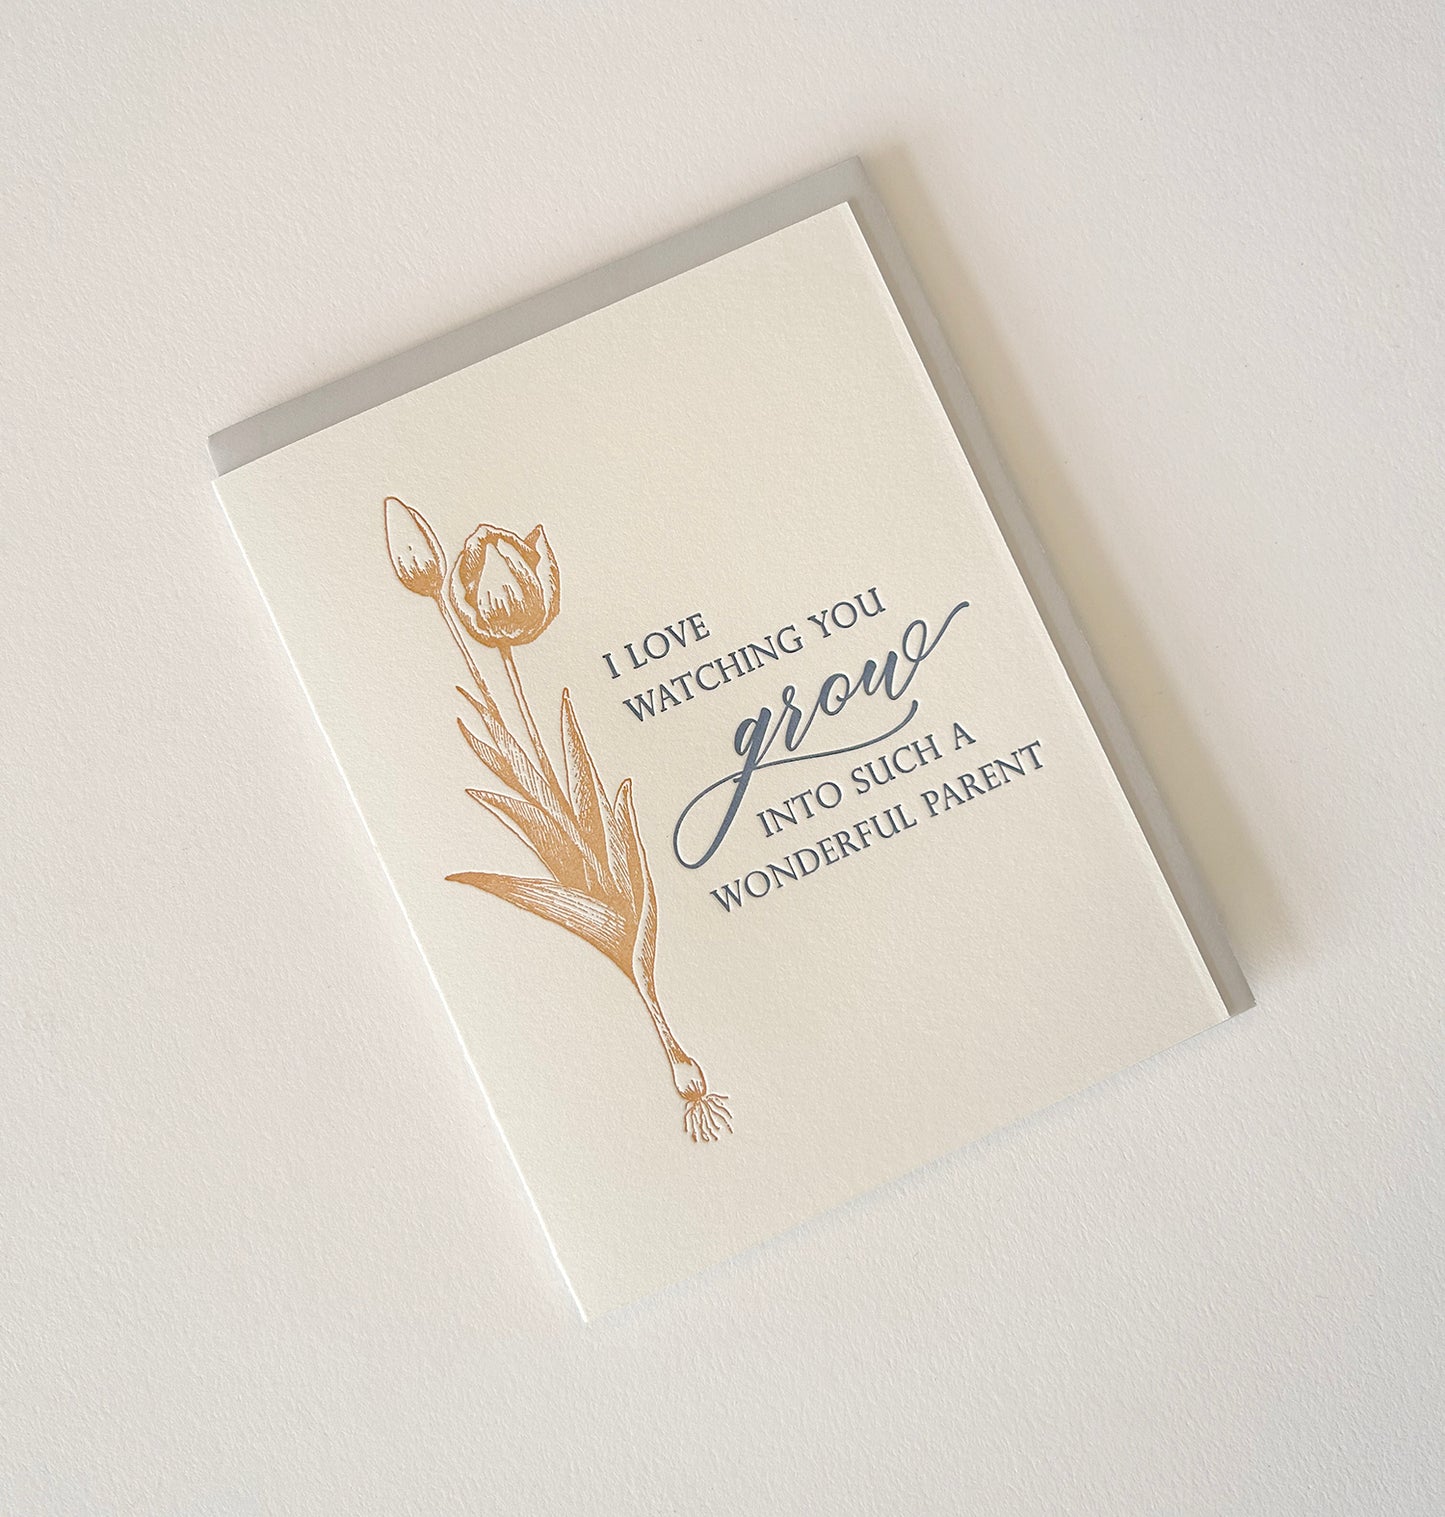 I Love Watching You Grow Into Such a Wonderful Parent Letterpress Greeting Card